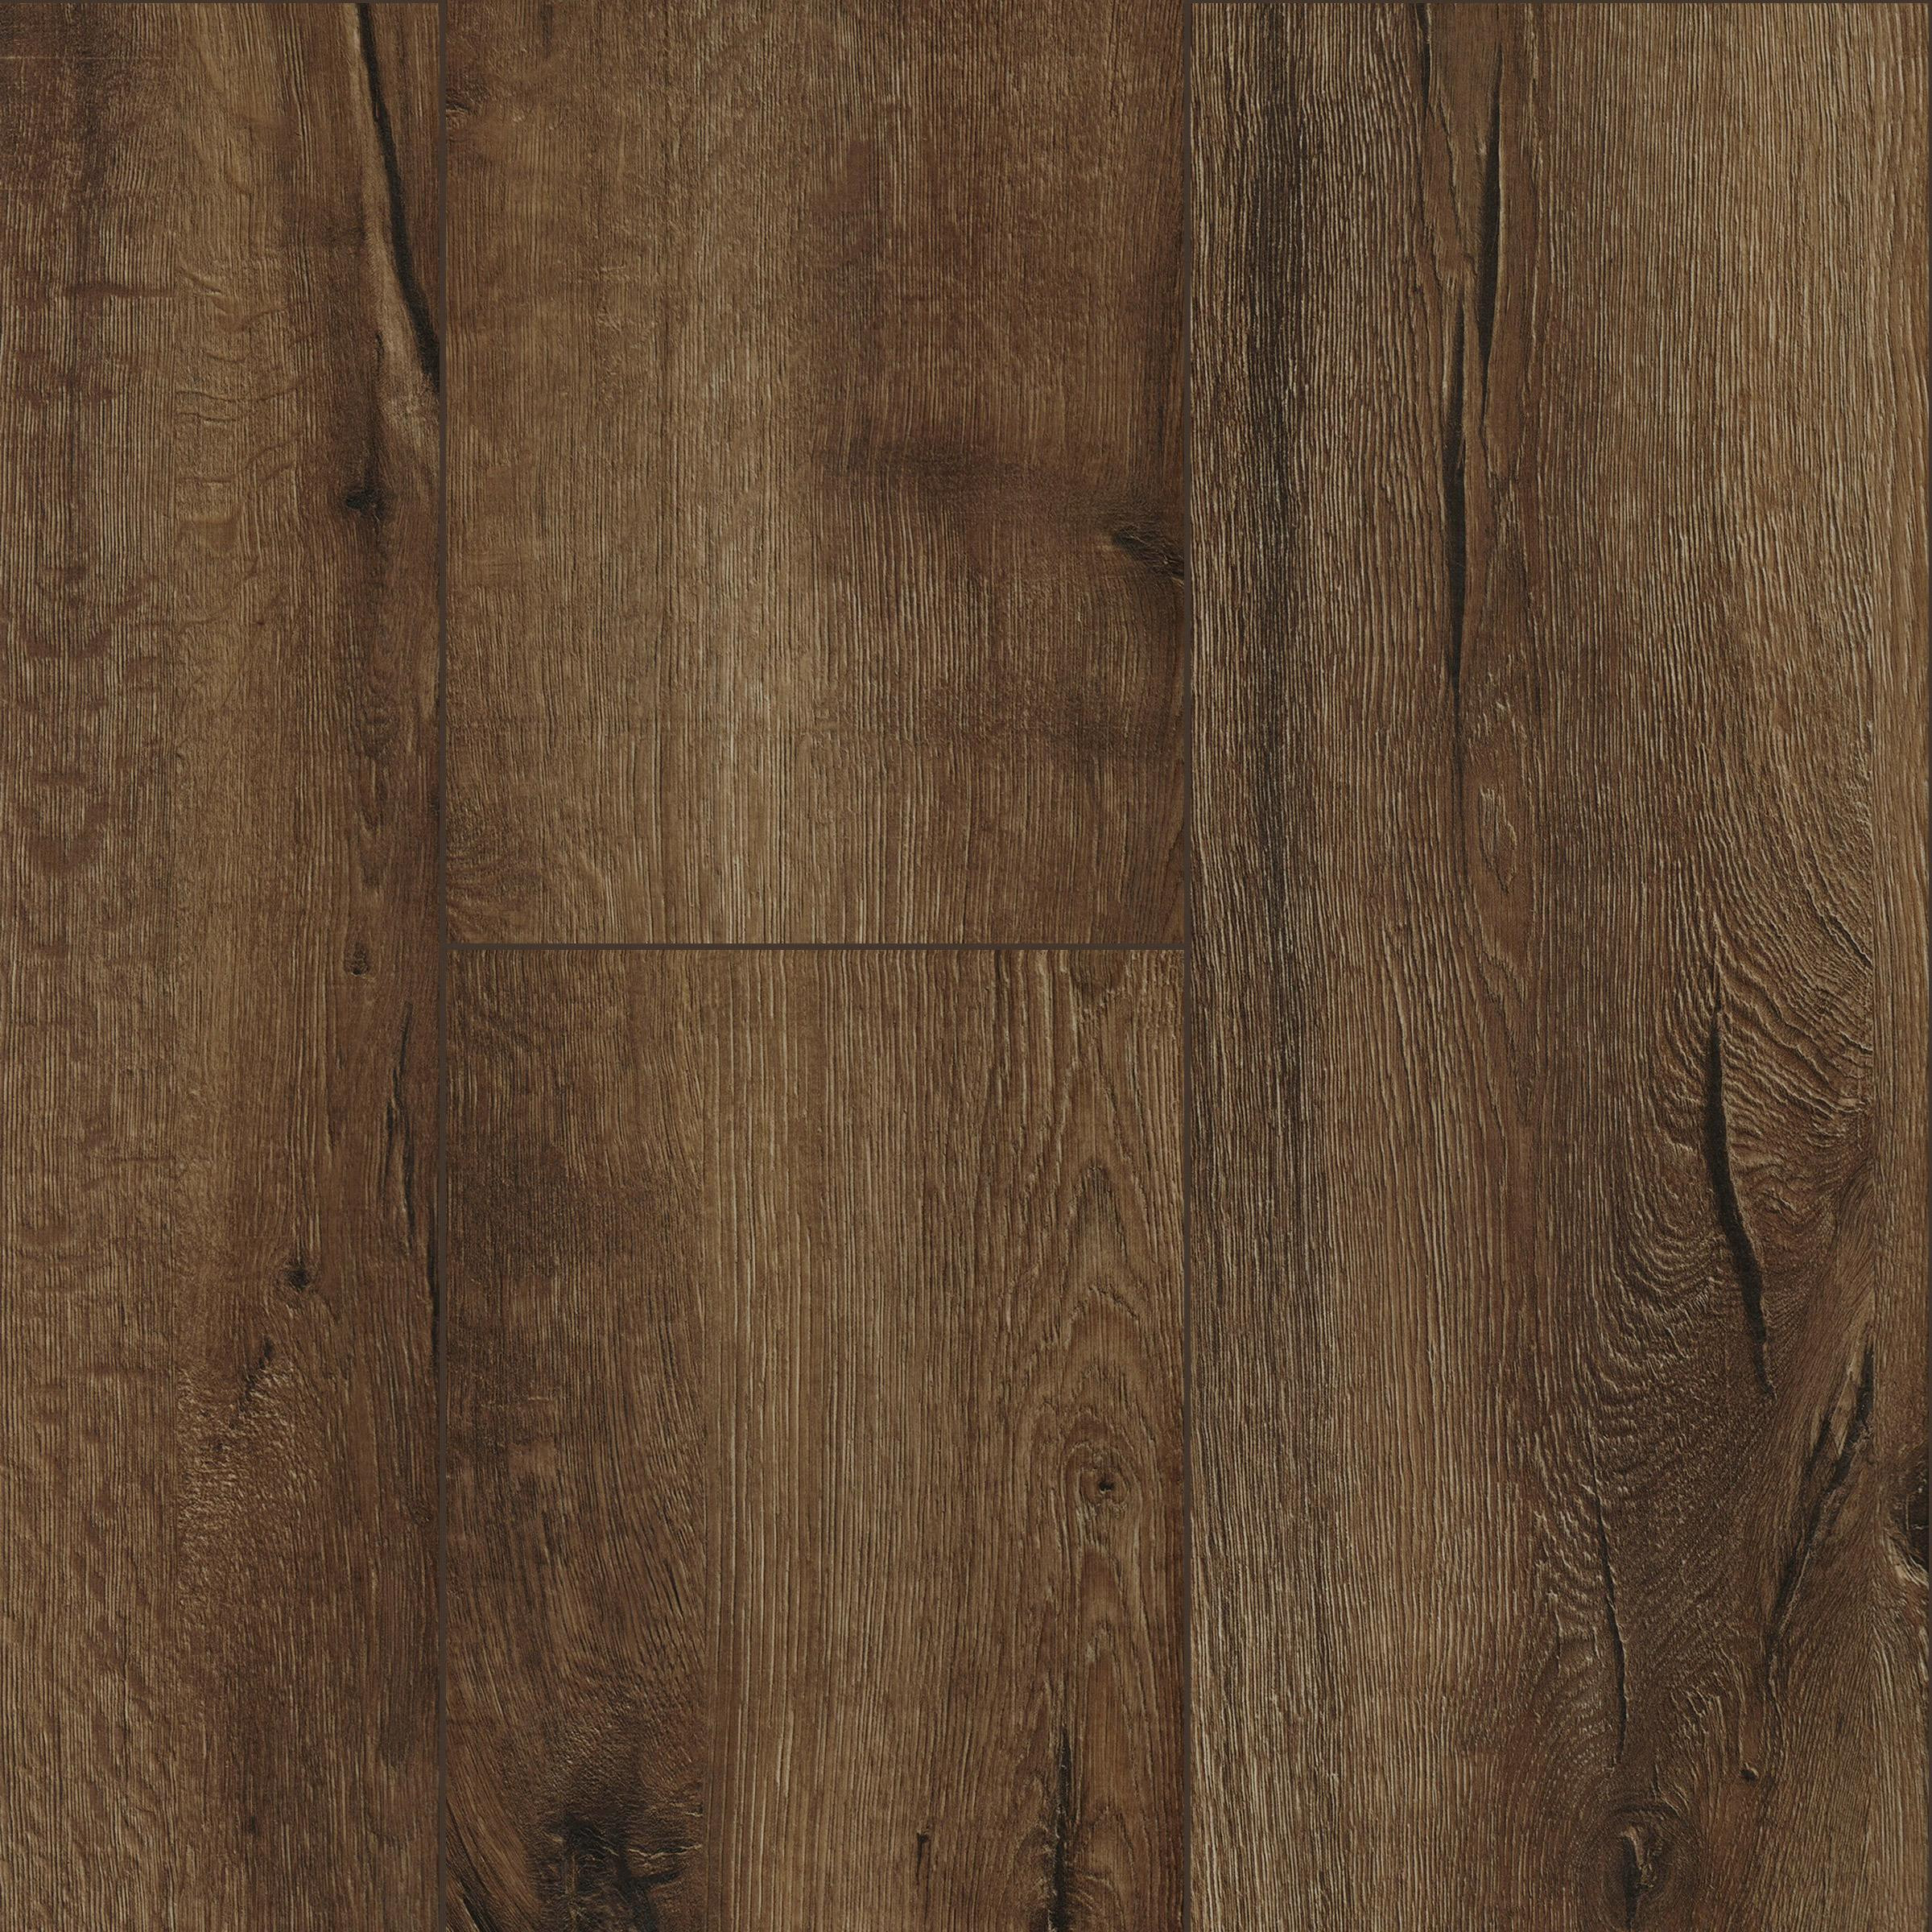 11 Amazing Light Wide Plank Hardwood Floors 2024 free download light wide plank hardwood floors of mohawk monticello hickory 9 wide glue down luxury vinyl plank flooring pertaining to 360507 9 25 x 59 approved